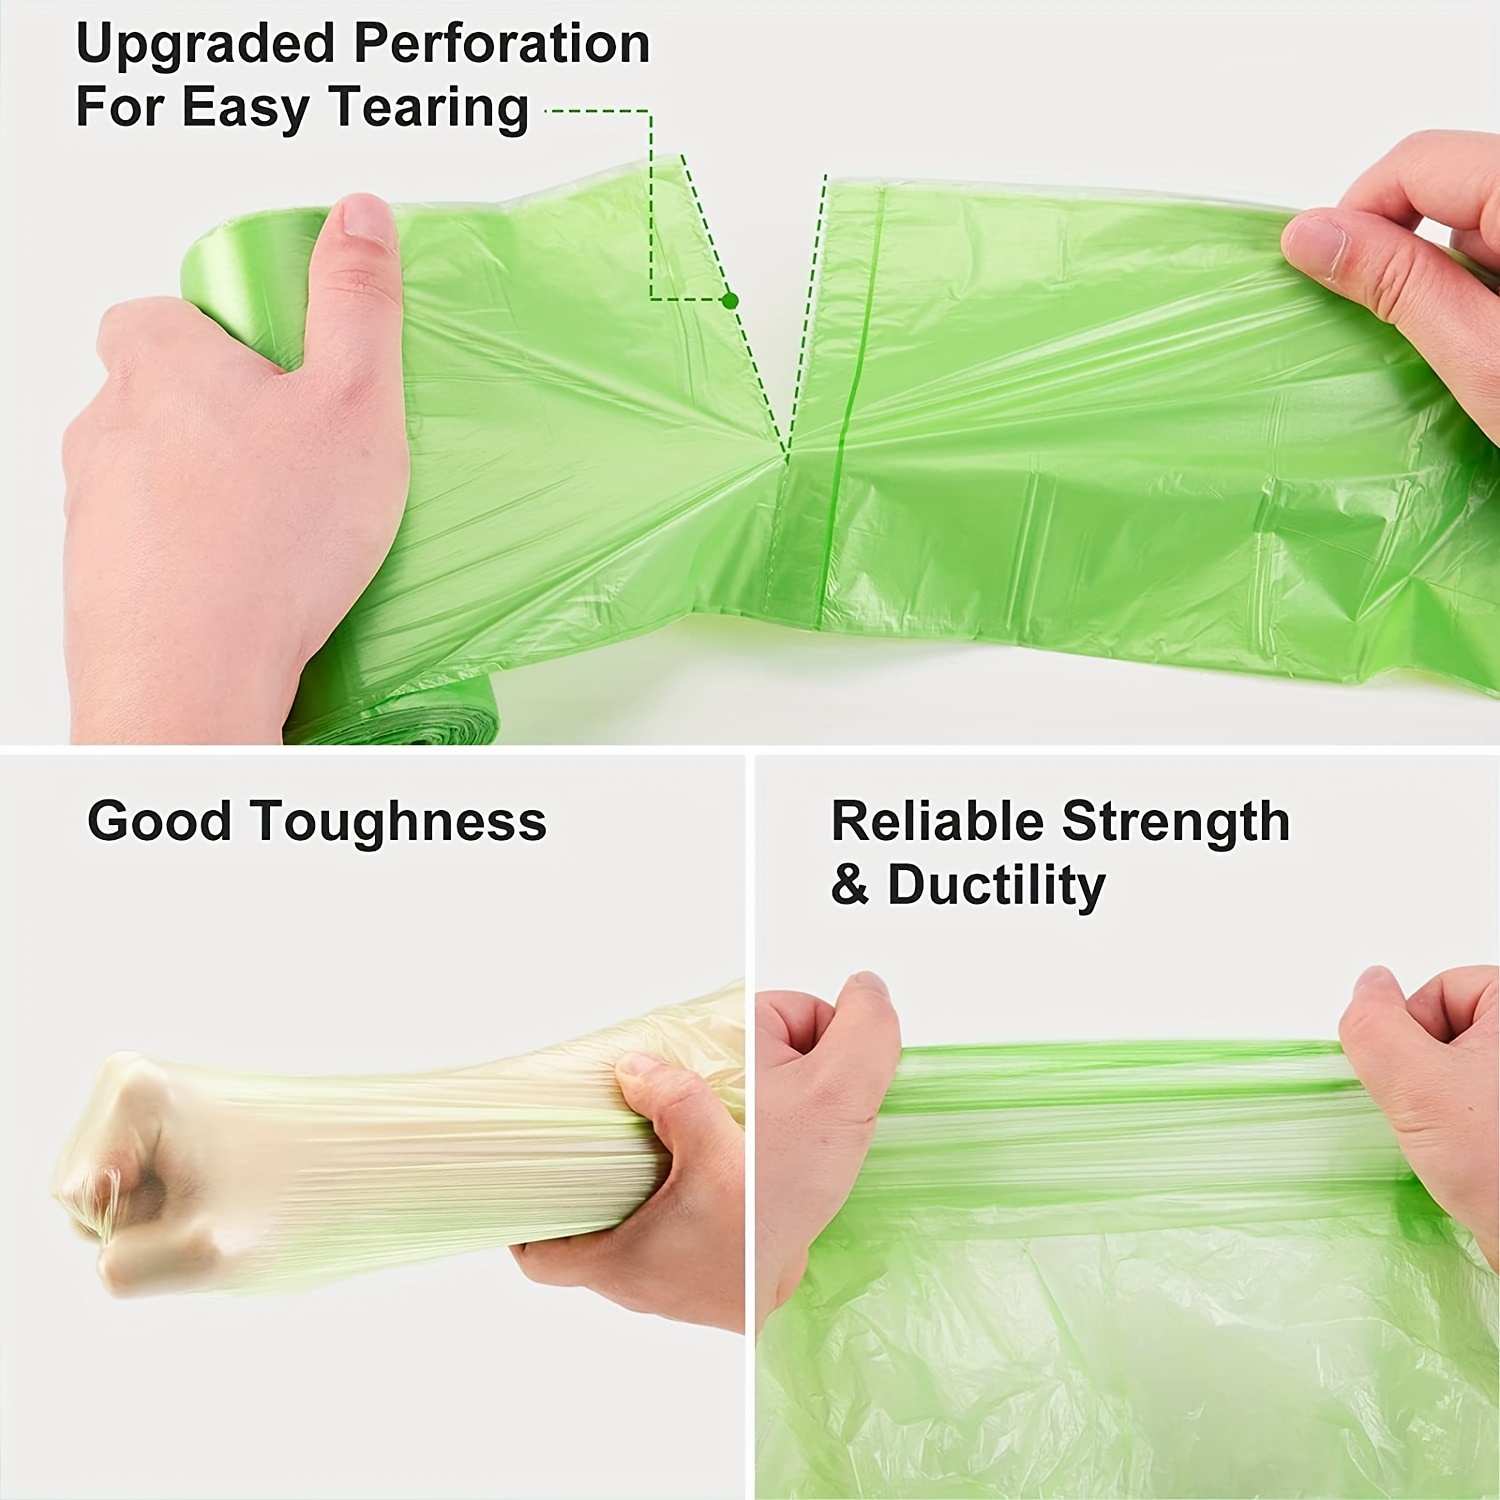 1roll Solid Thick Trash Bag, Simple Pink Handle-Tie Trash Bag, For Home